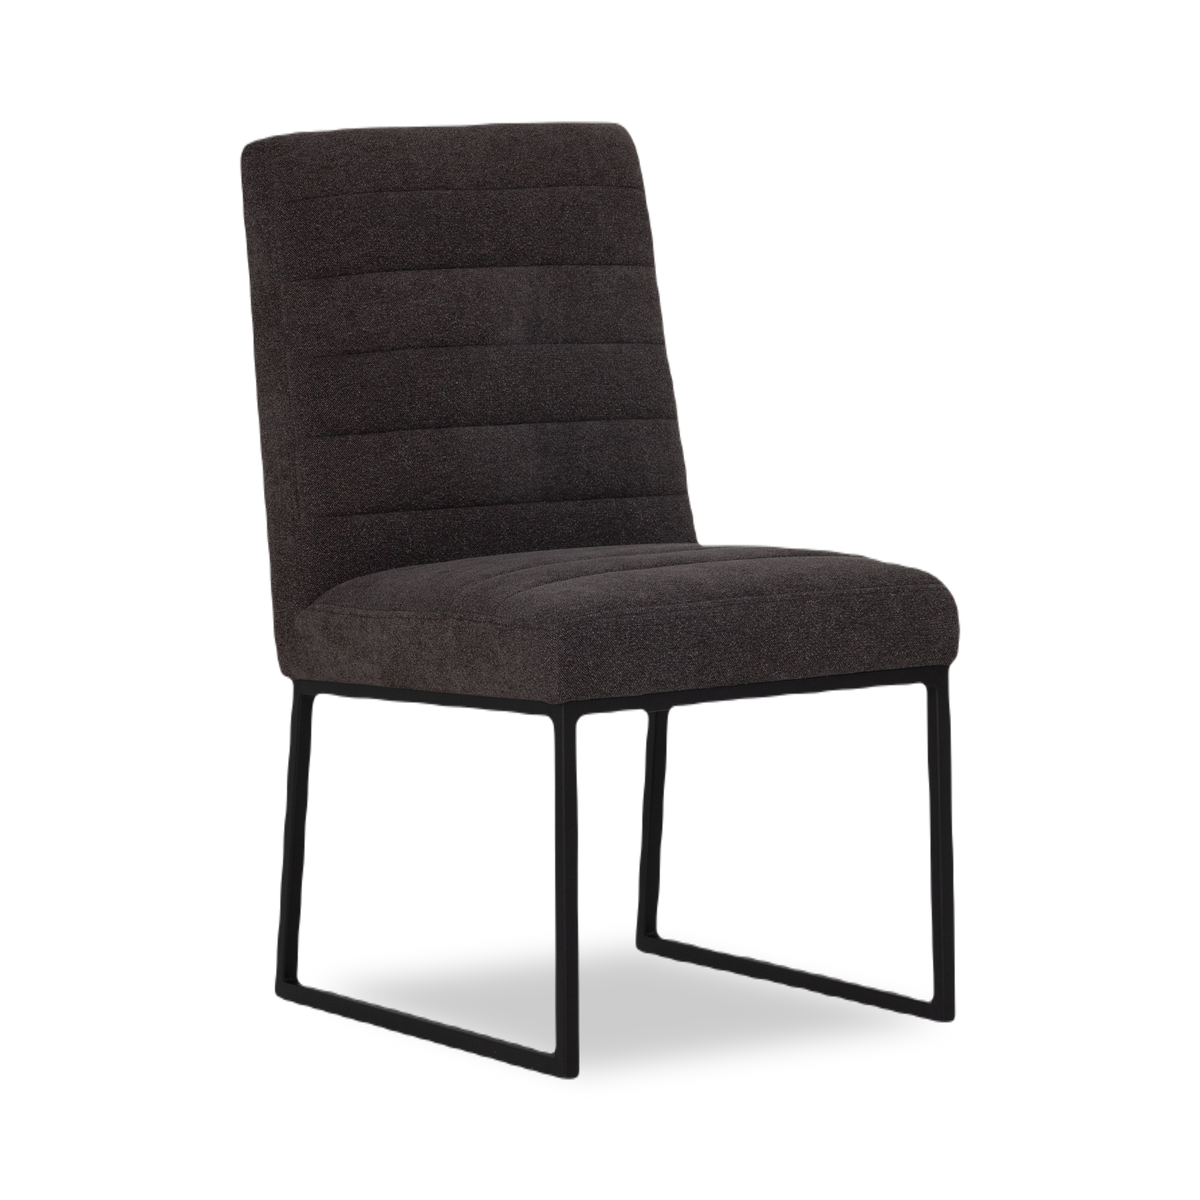 Showcasing clean lines, the Arcade Side Chair is a contemporary classic.